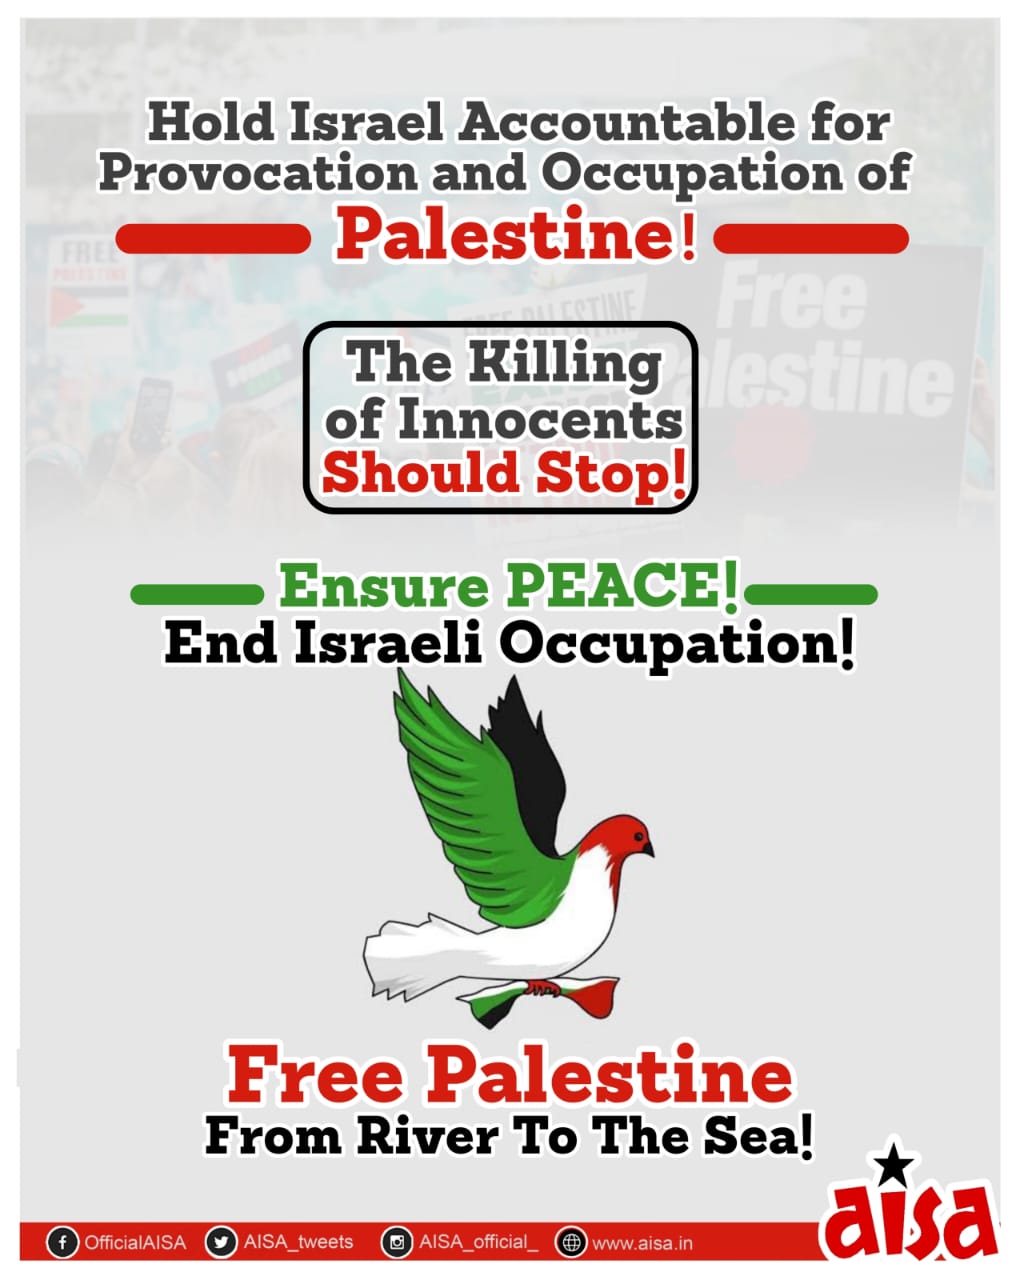 Free Palestine – From River to Sea!